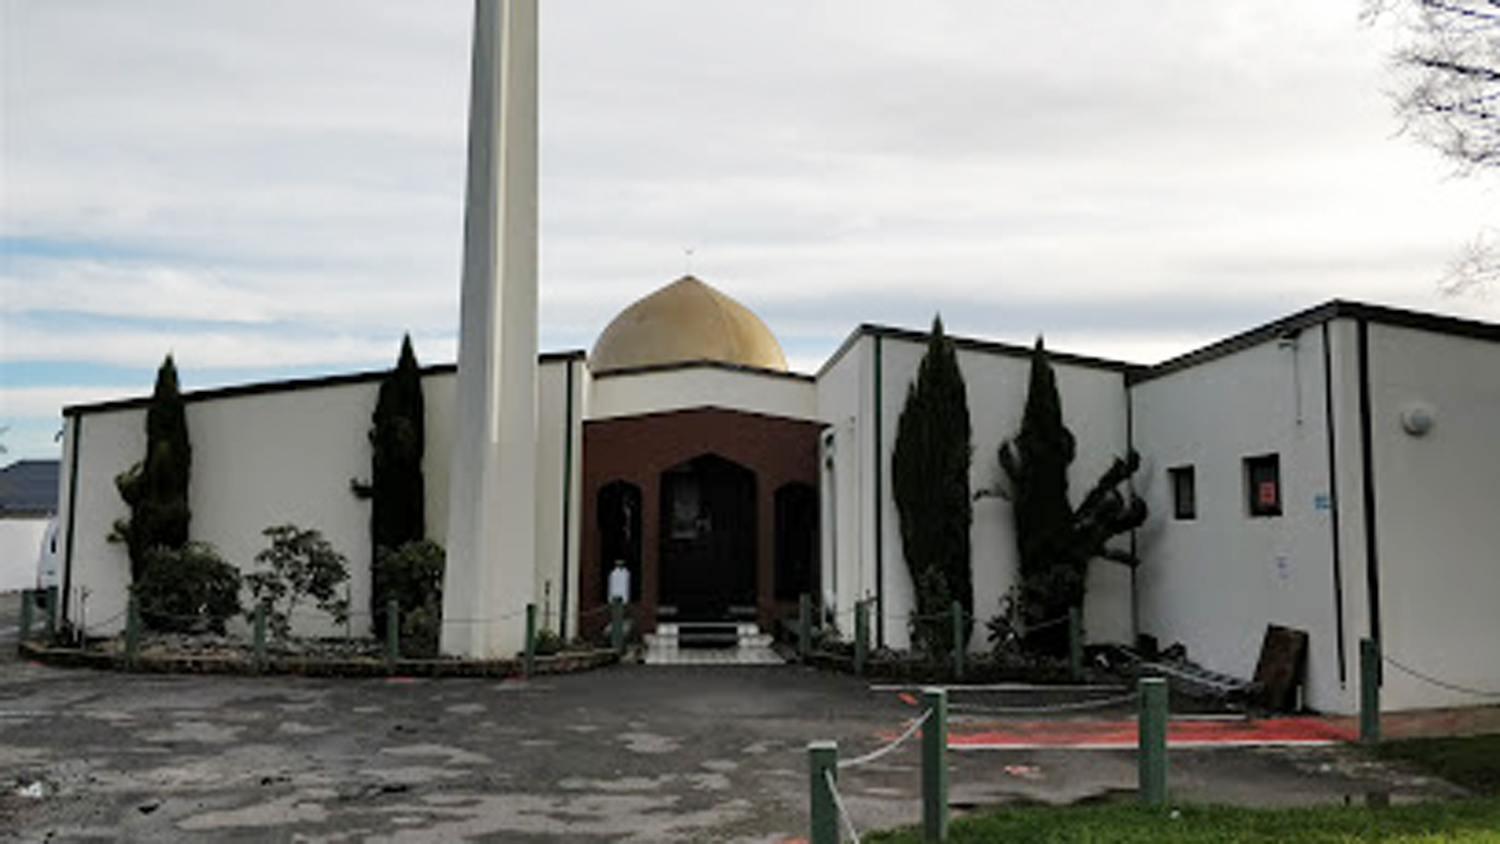 Entrance of the Al Noor Mosque in Christchurch.